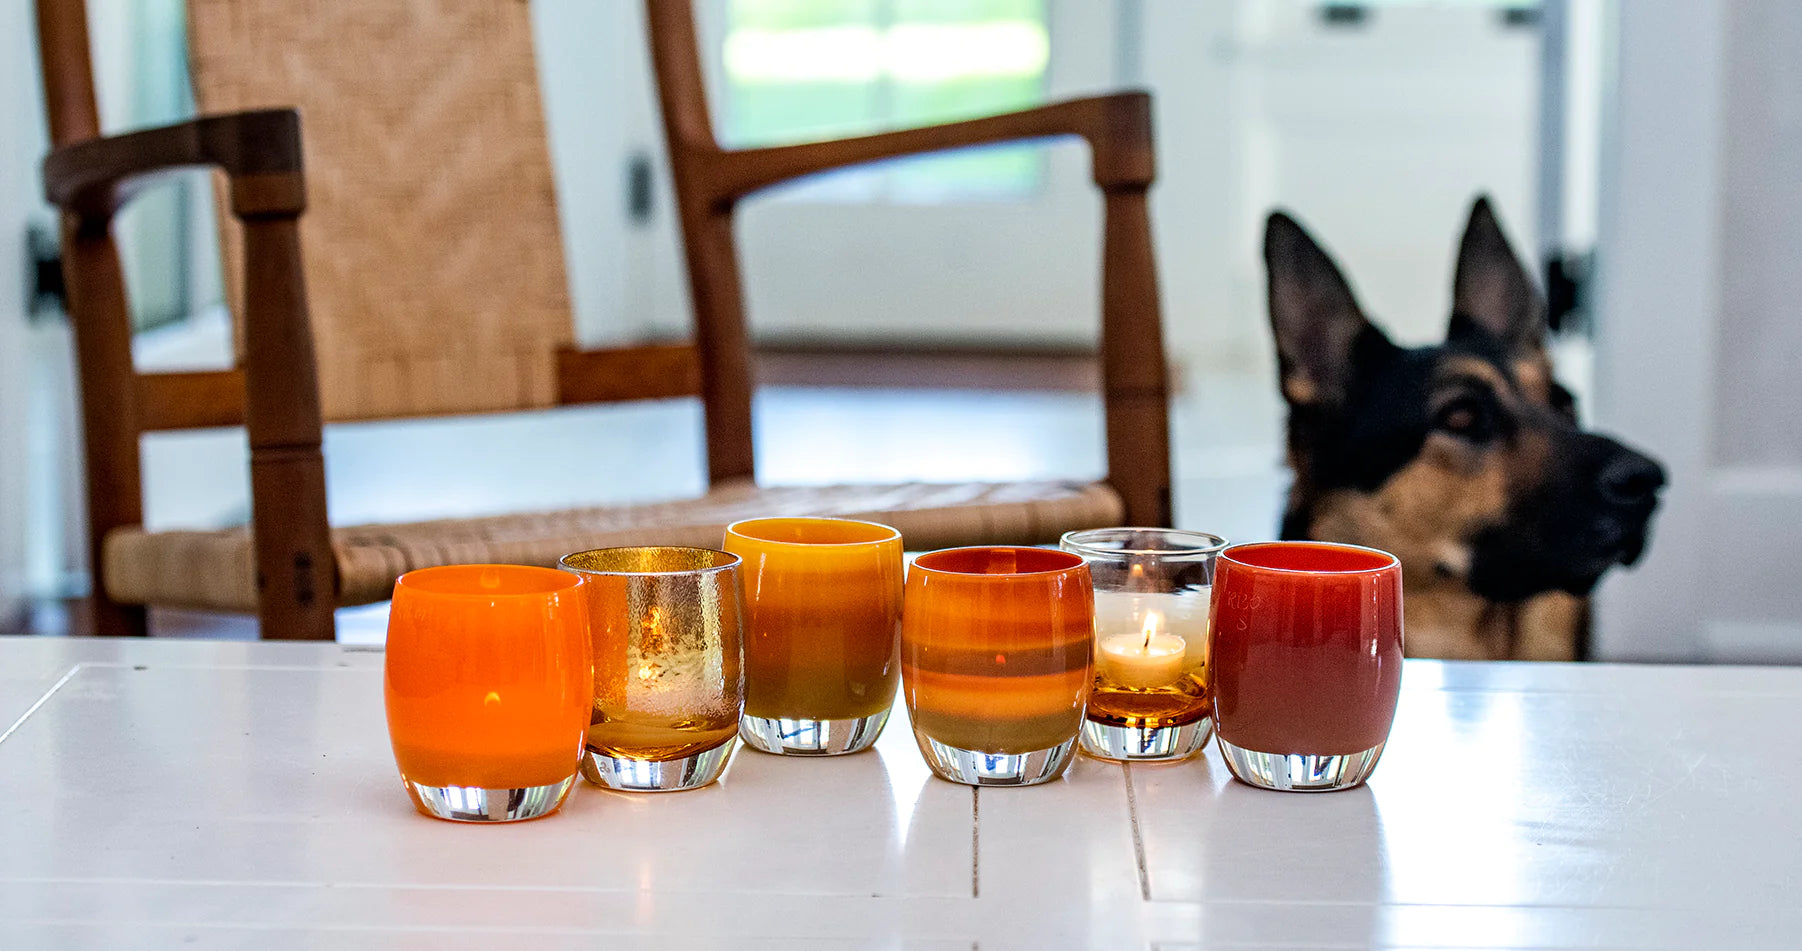 autumnal collection of hand-blown glass votive candle holders on table with dog in background